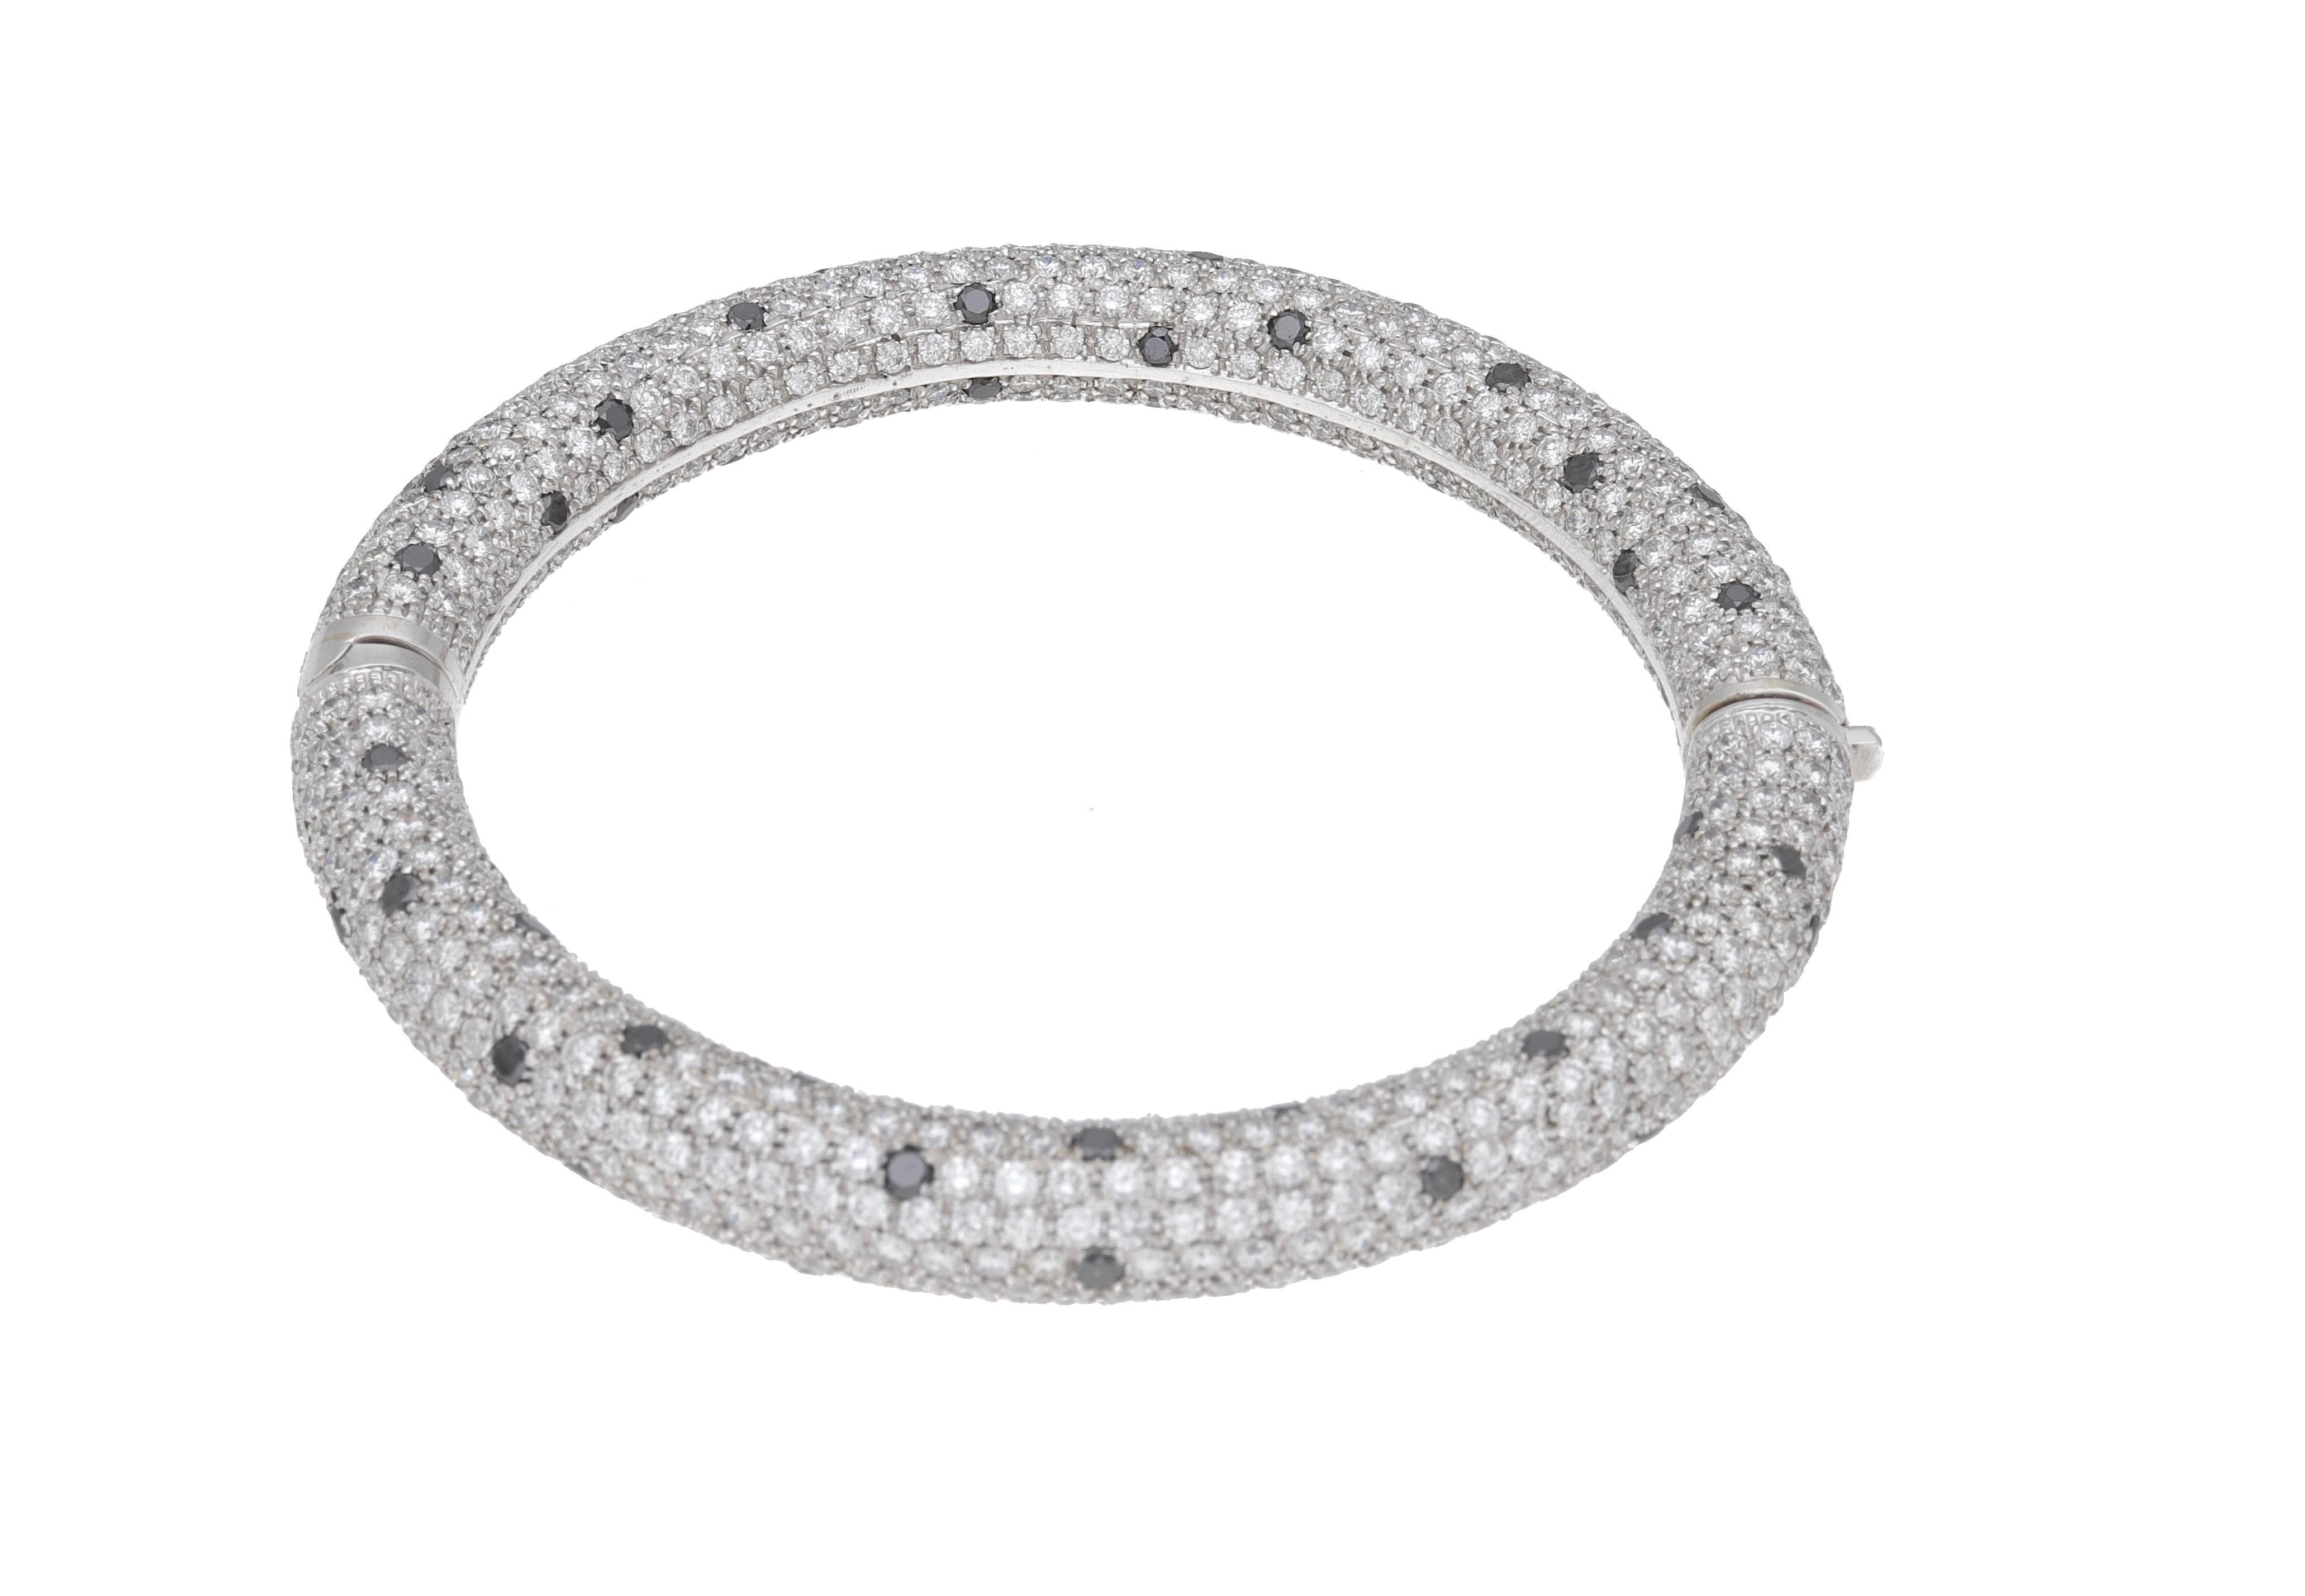 18 kt. white gold bangle with black and white diamonds.
This bangle is hand made in Italy.
Is a perfect piece to light up your style.
The bracelet has a clasp that you can open and close.
2013

Round-cut white diamonds: ct. 22.30 ( H-I color -